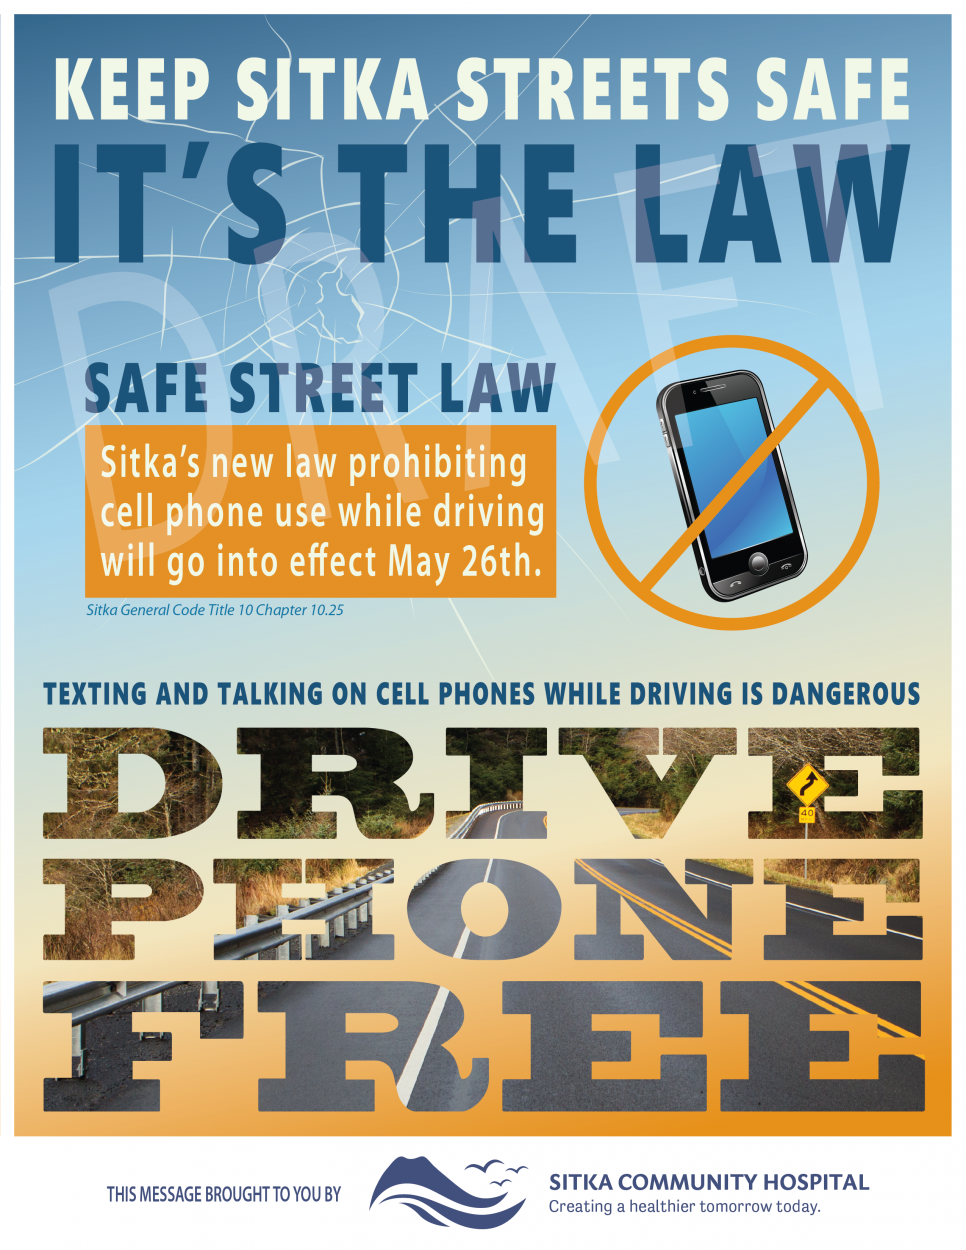 Sitka bans cell phones to reduce distracted driving